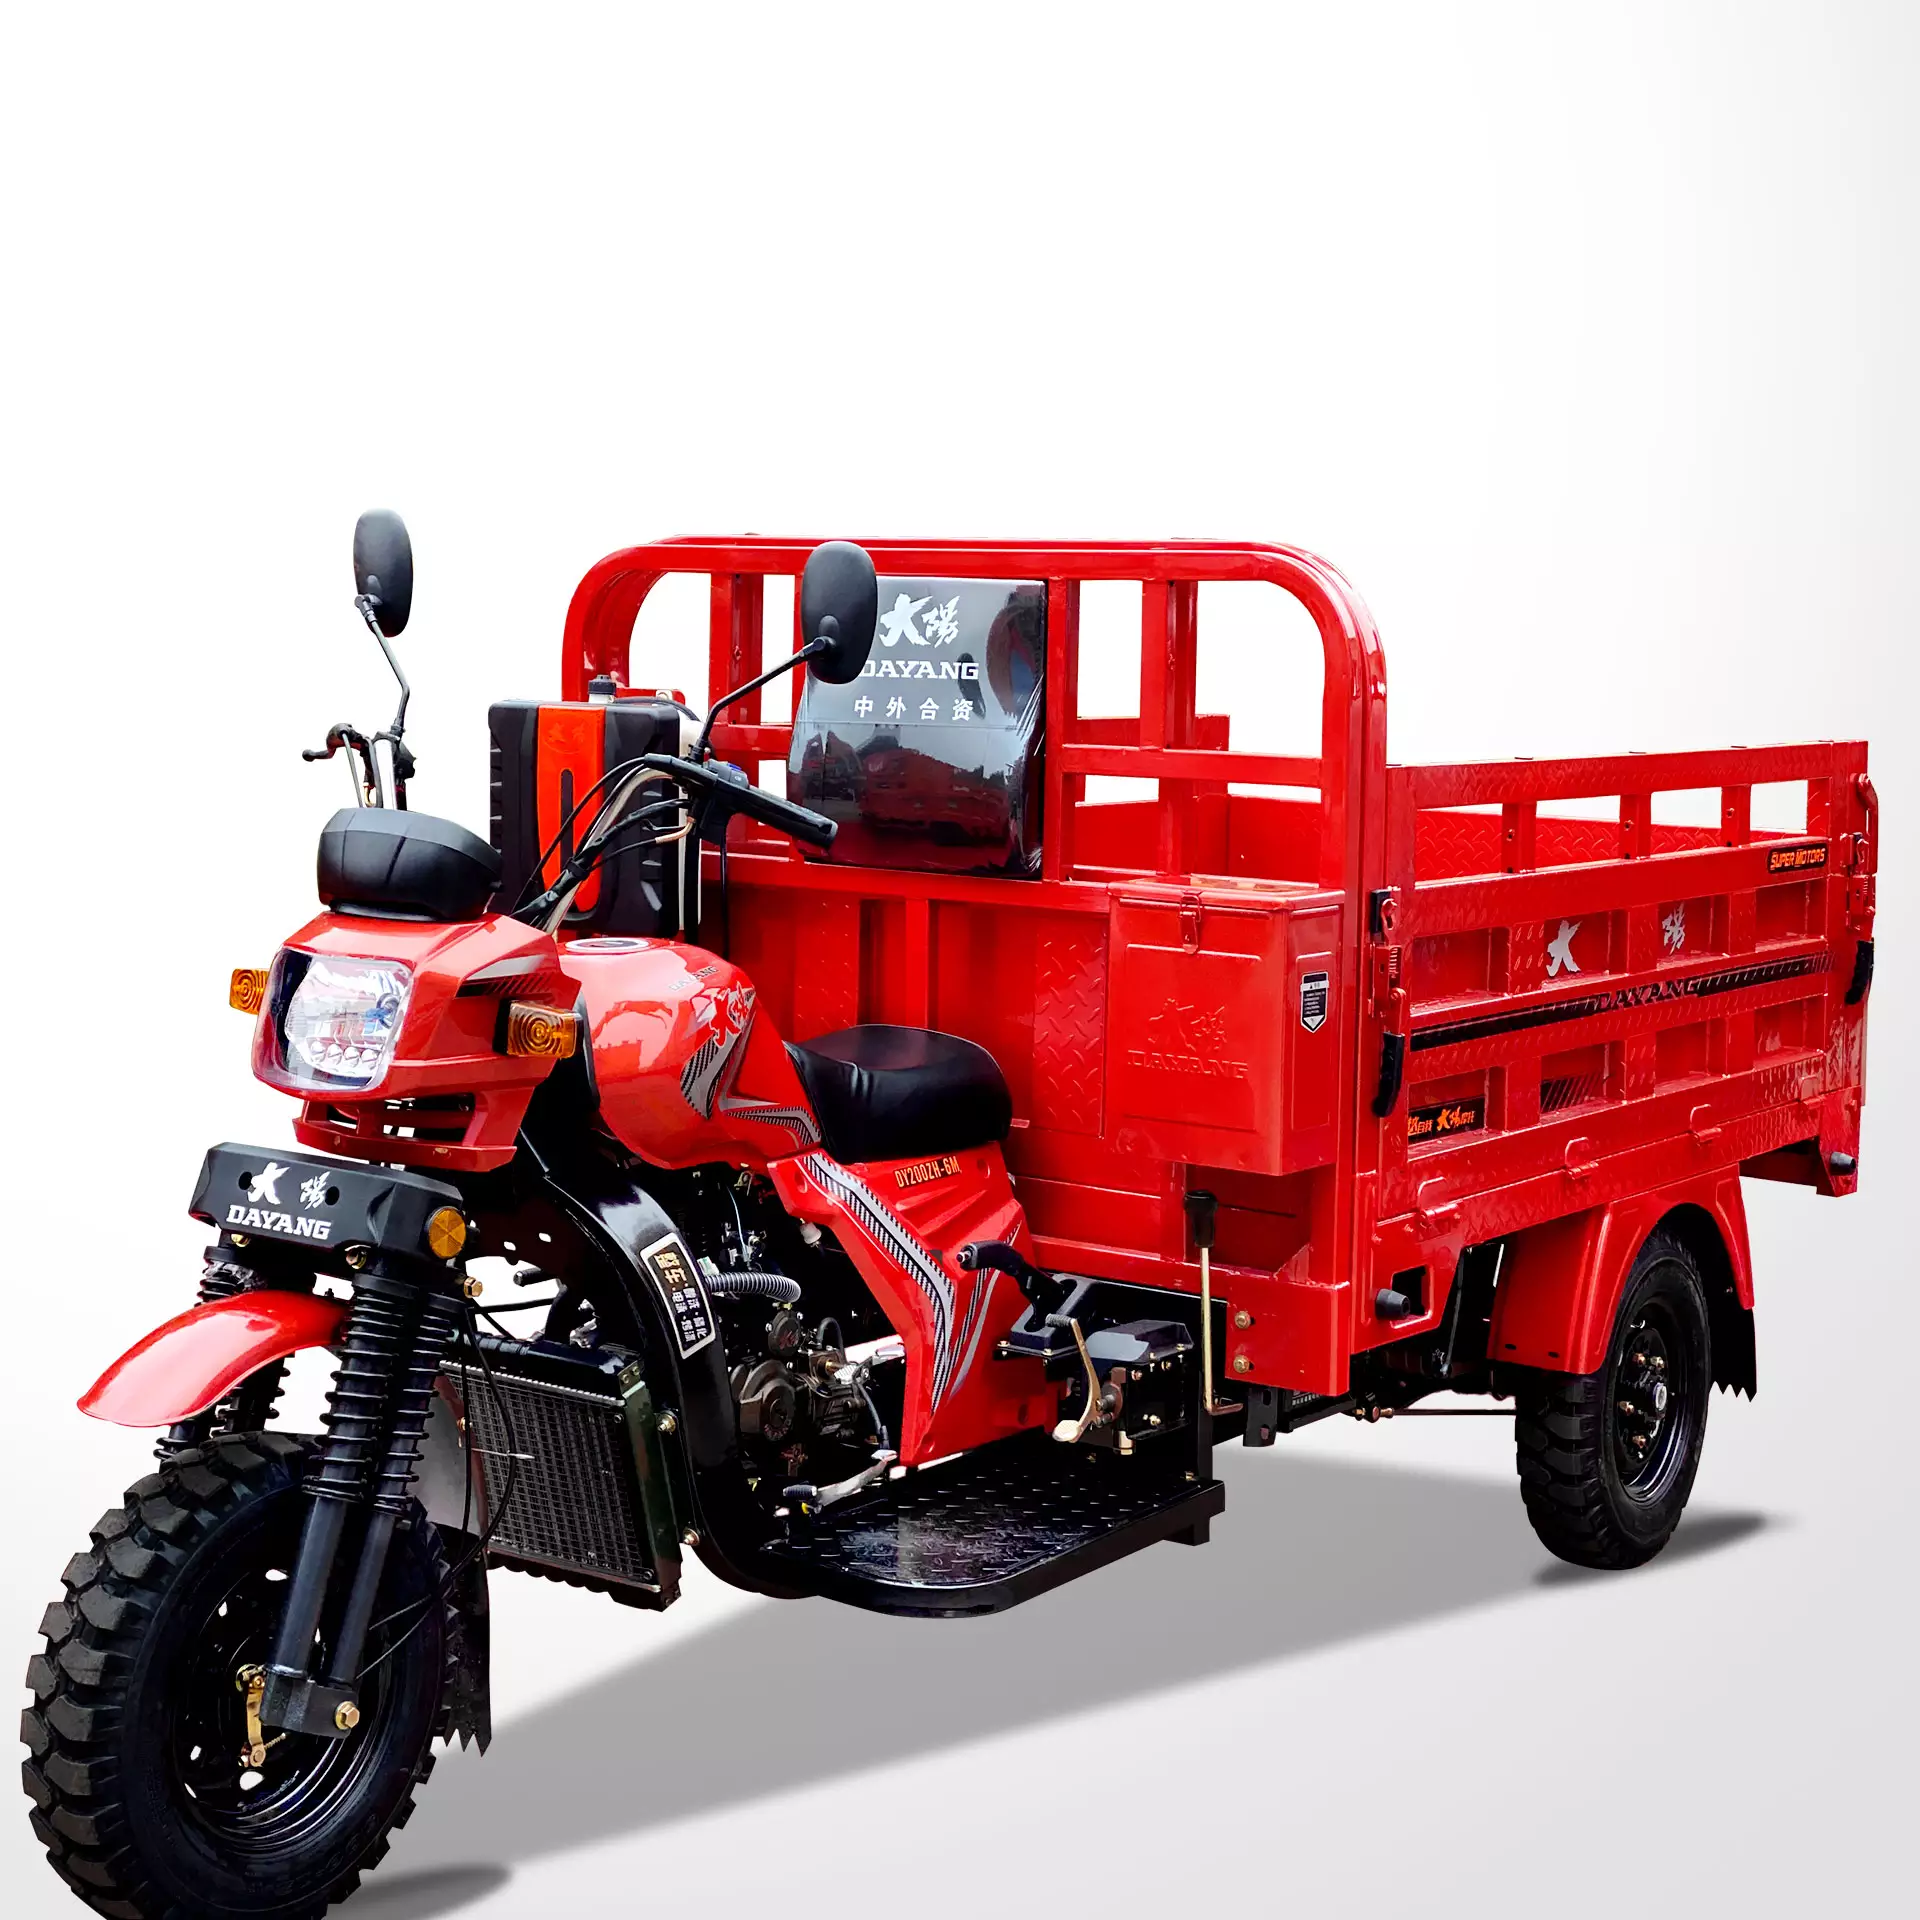 Motorized Cargo 200cc Heavy loading Tricycles Three Wheeler Motorcycle CCC Origin Type Open 180 brake drums for rear axles